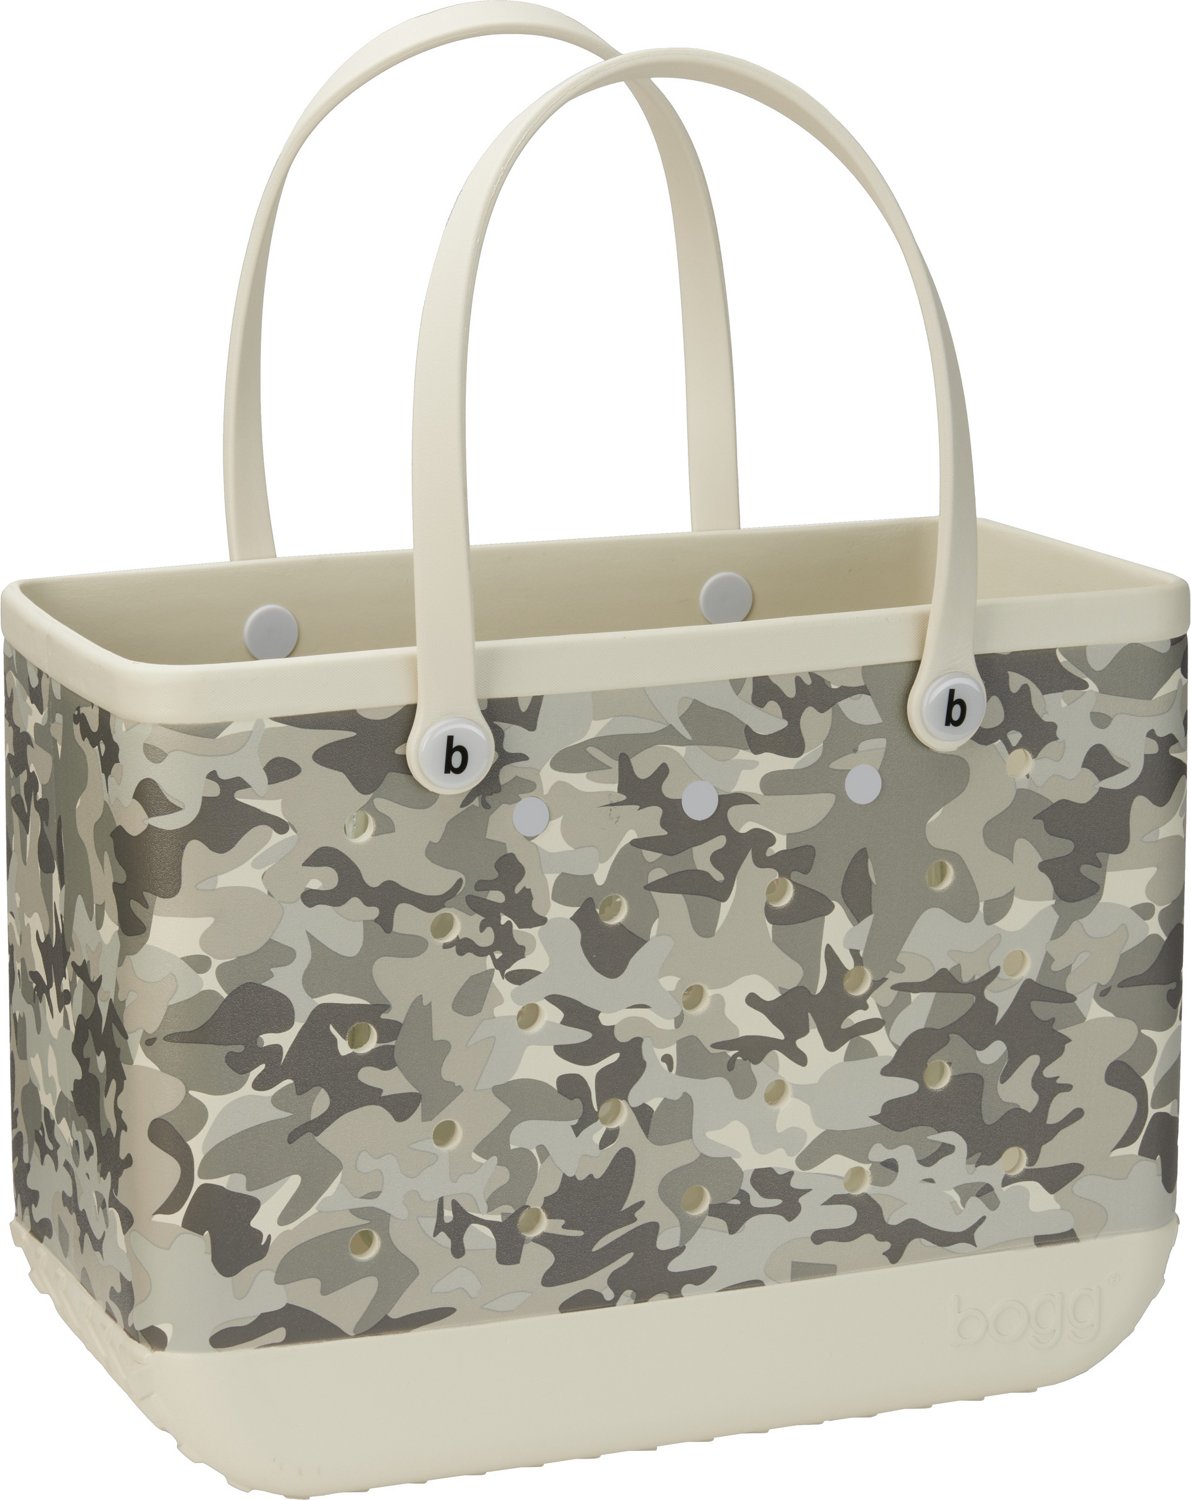 Limited Edition Canvas Boat Tote Bag by Balanced Design